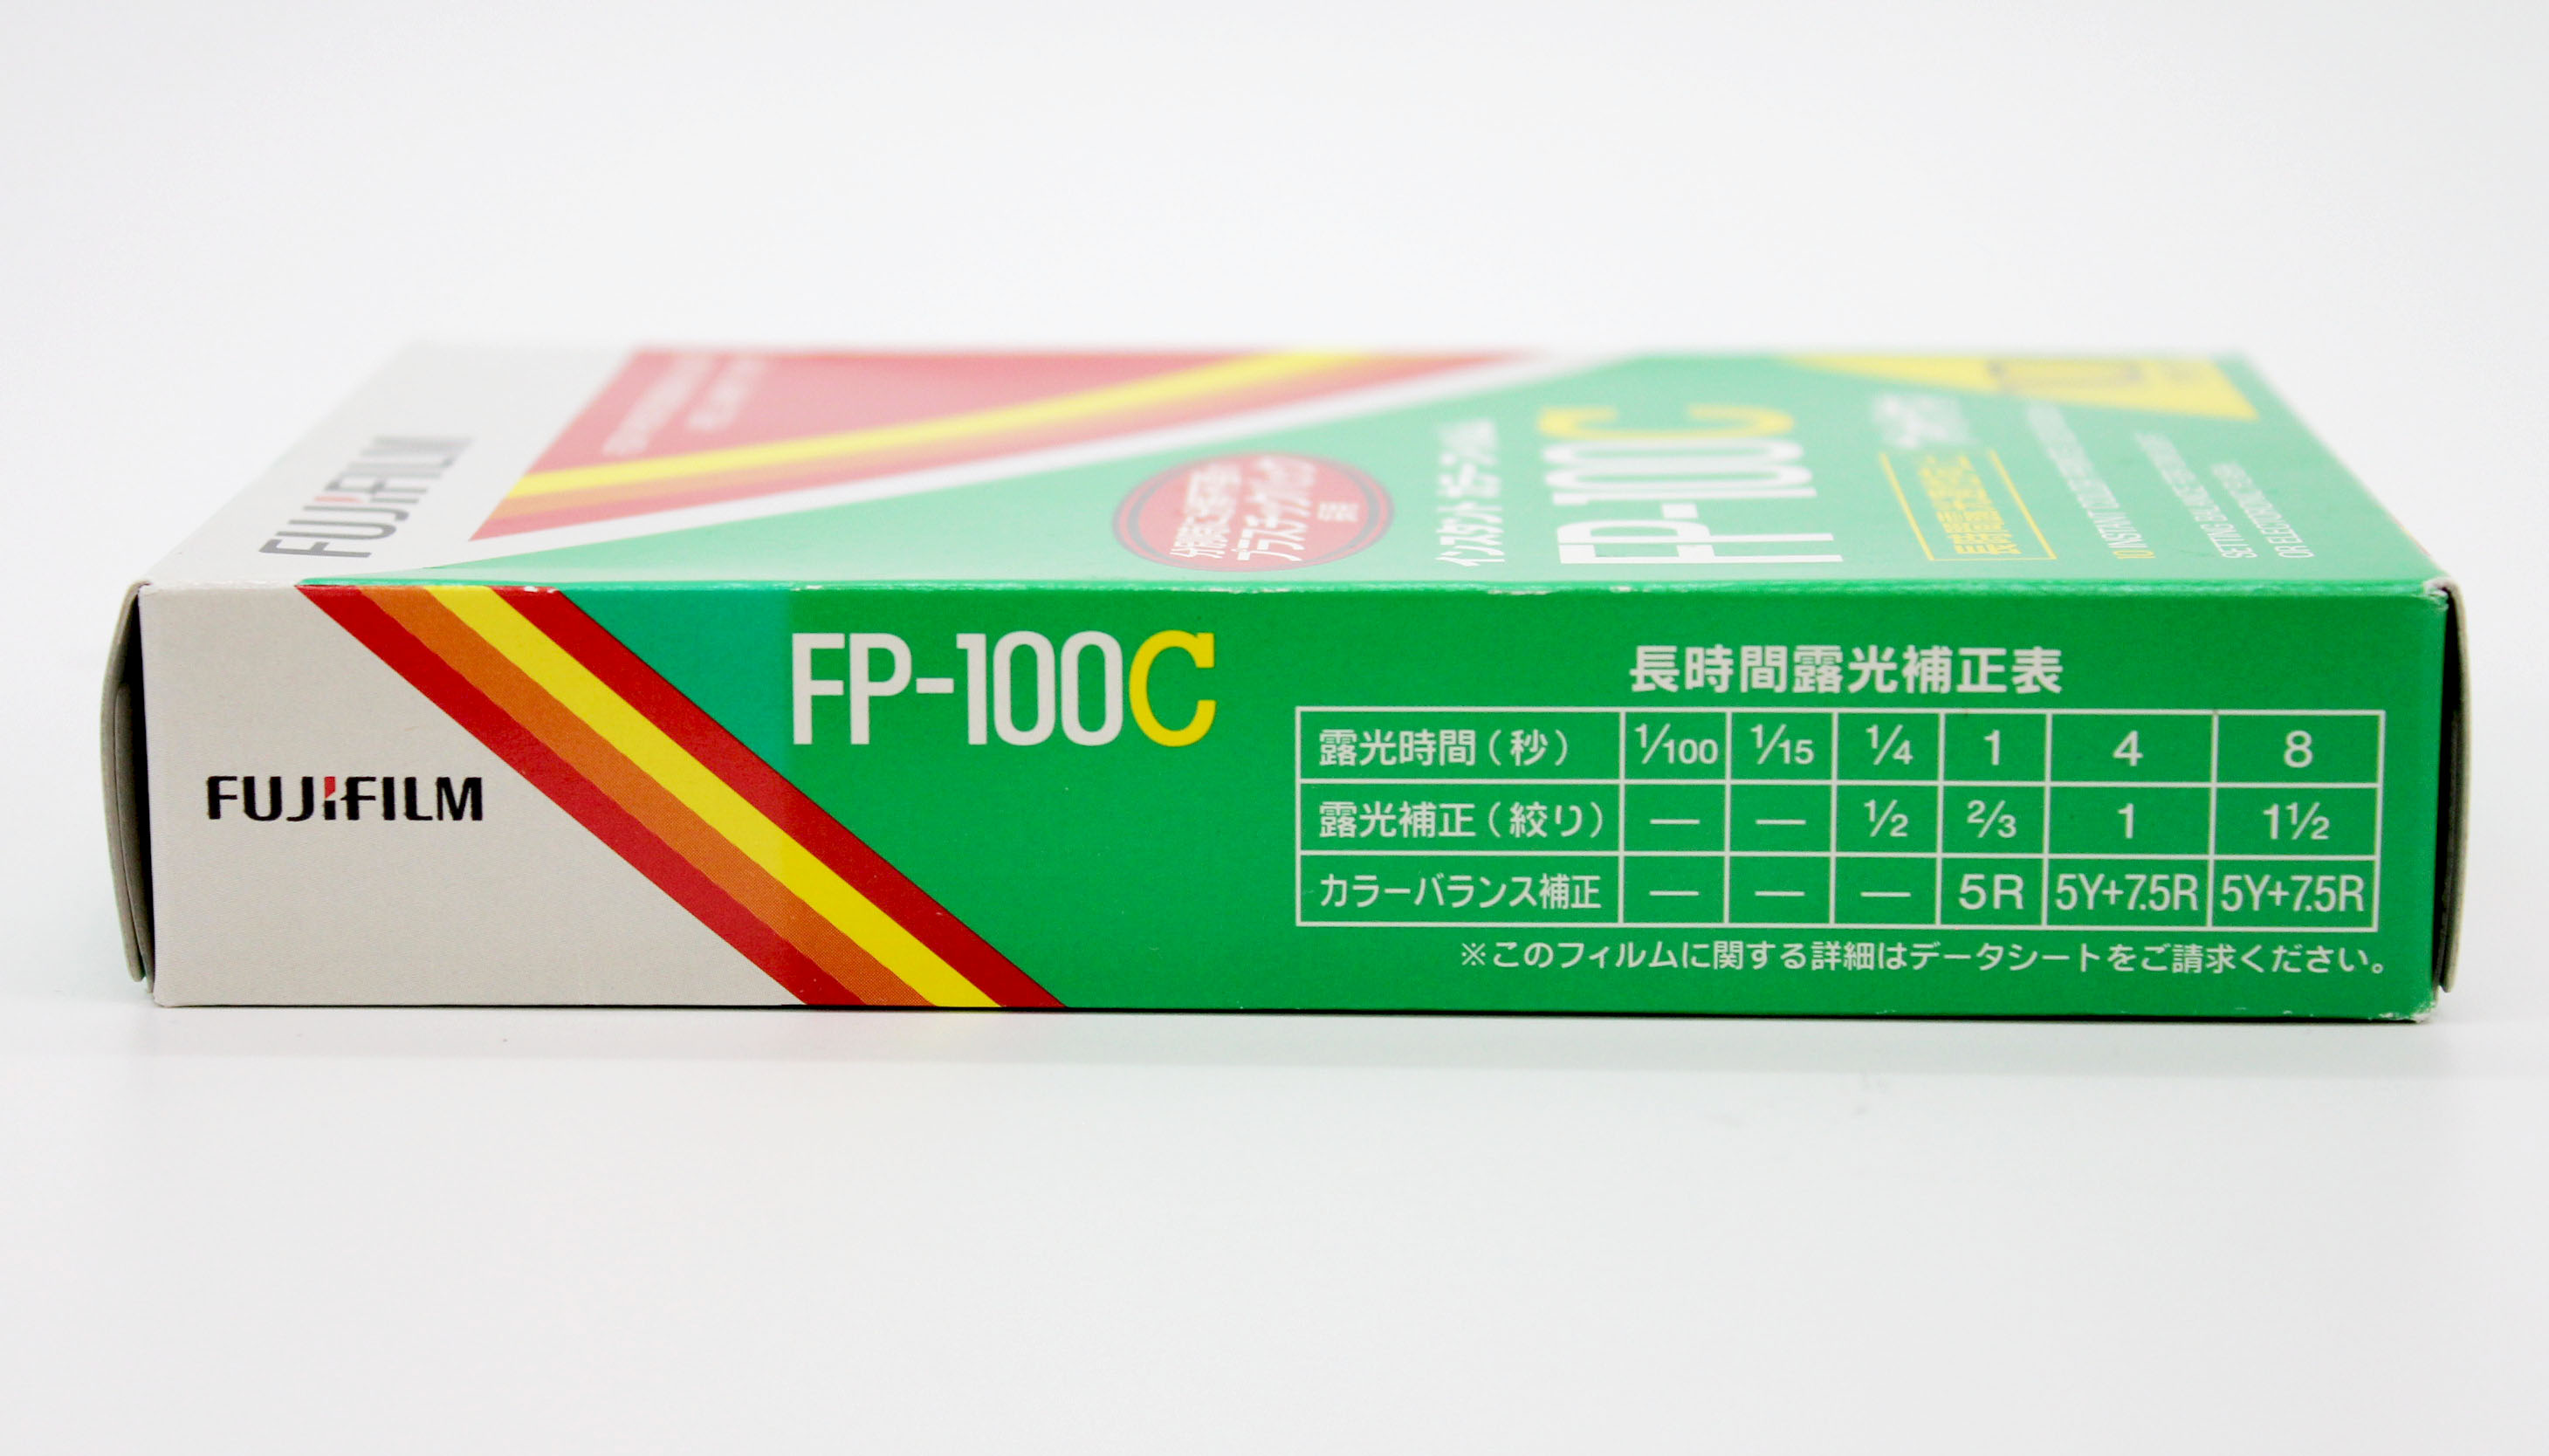  Fujifilm FP-100C Professional Instant Color Film Expired 11/2017 from Japan Photo 4